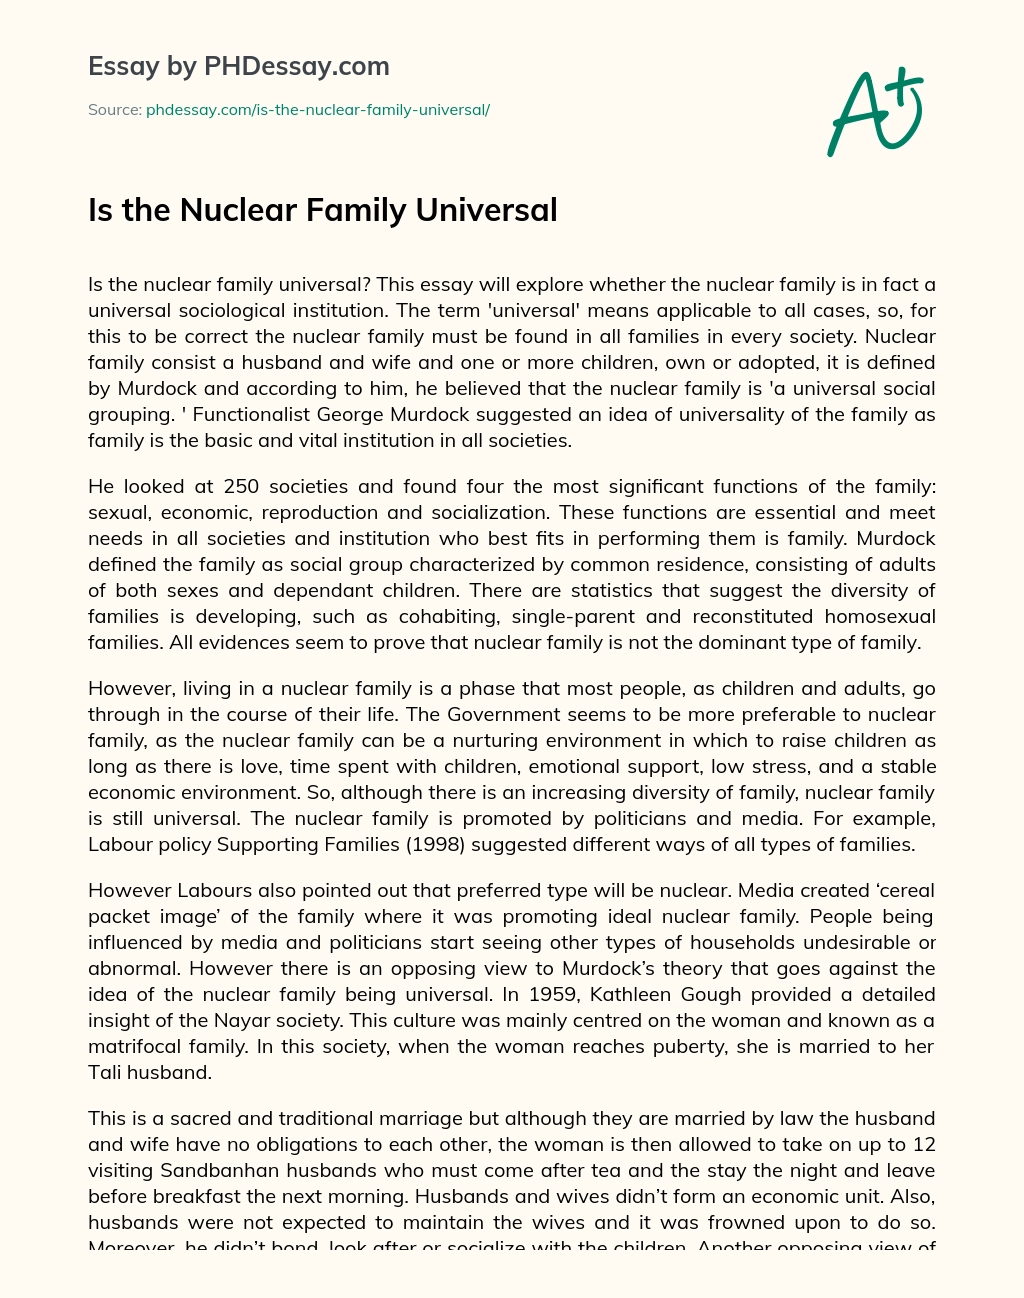 Is the Nuclear Family Universal essay